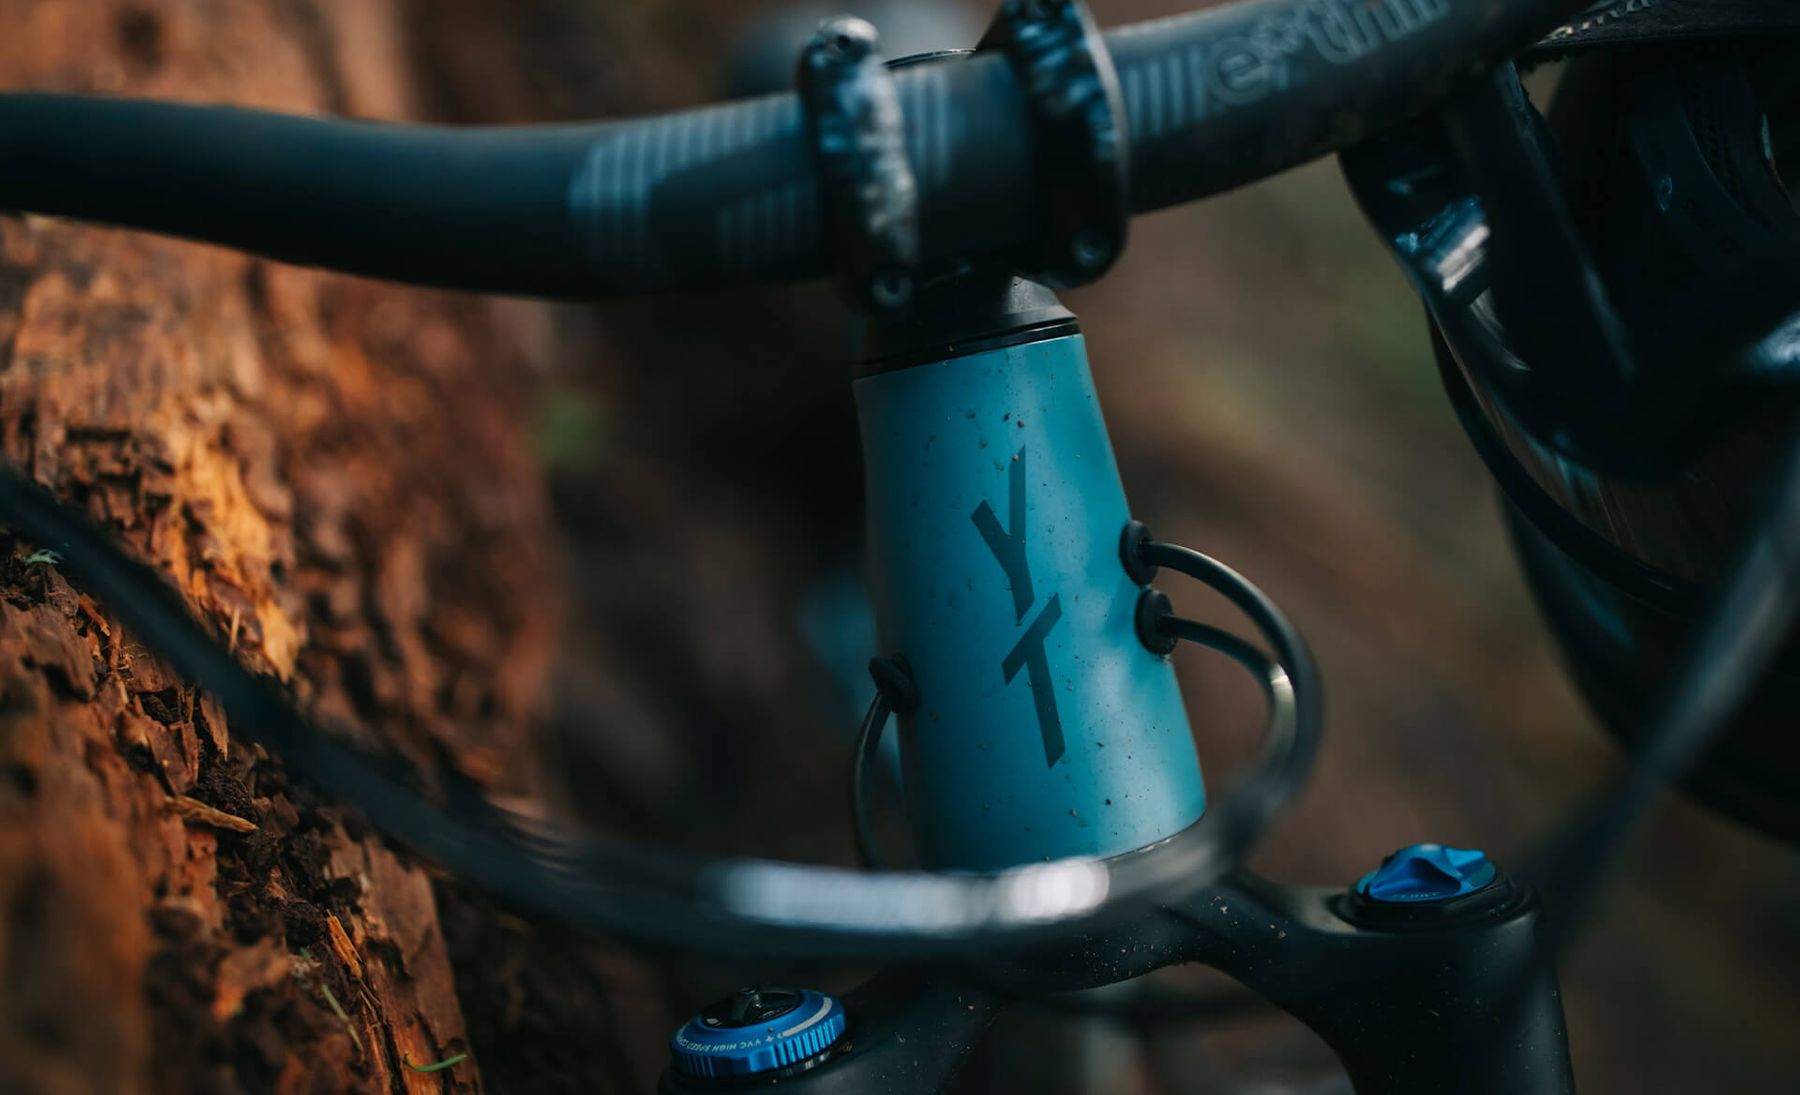 YT Capra Pro and Base alloy models refreshed for 2021